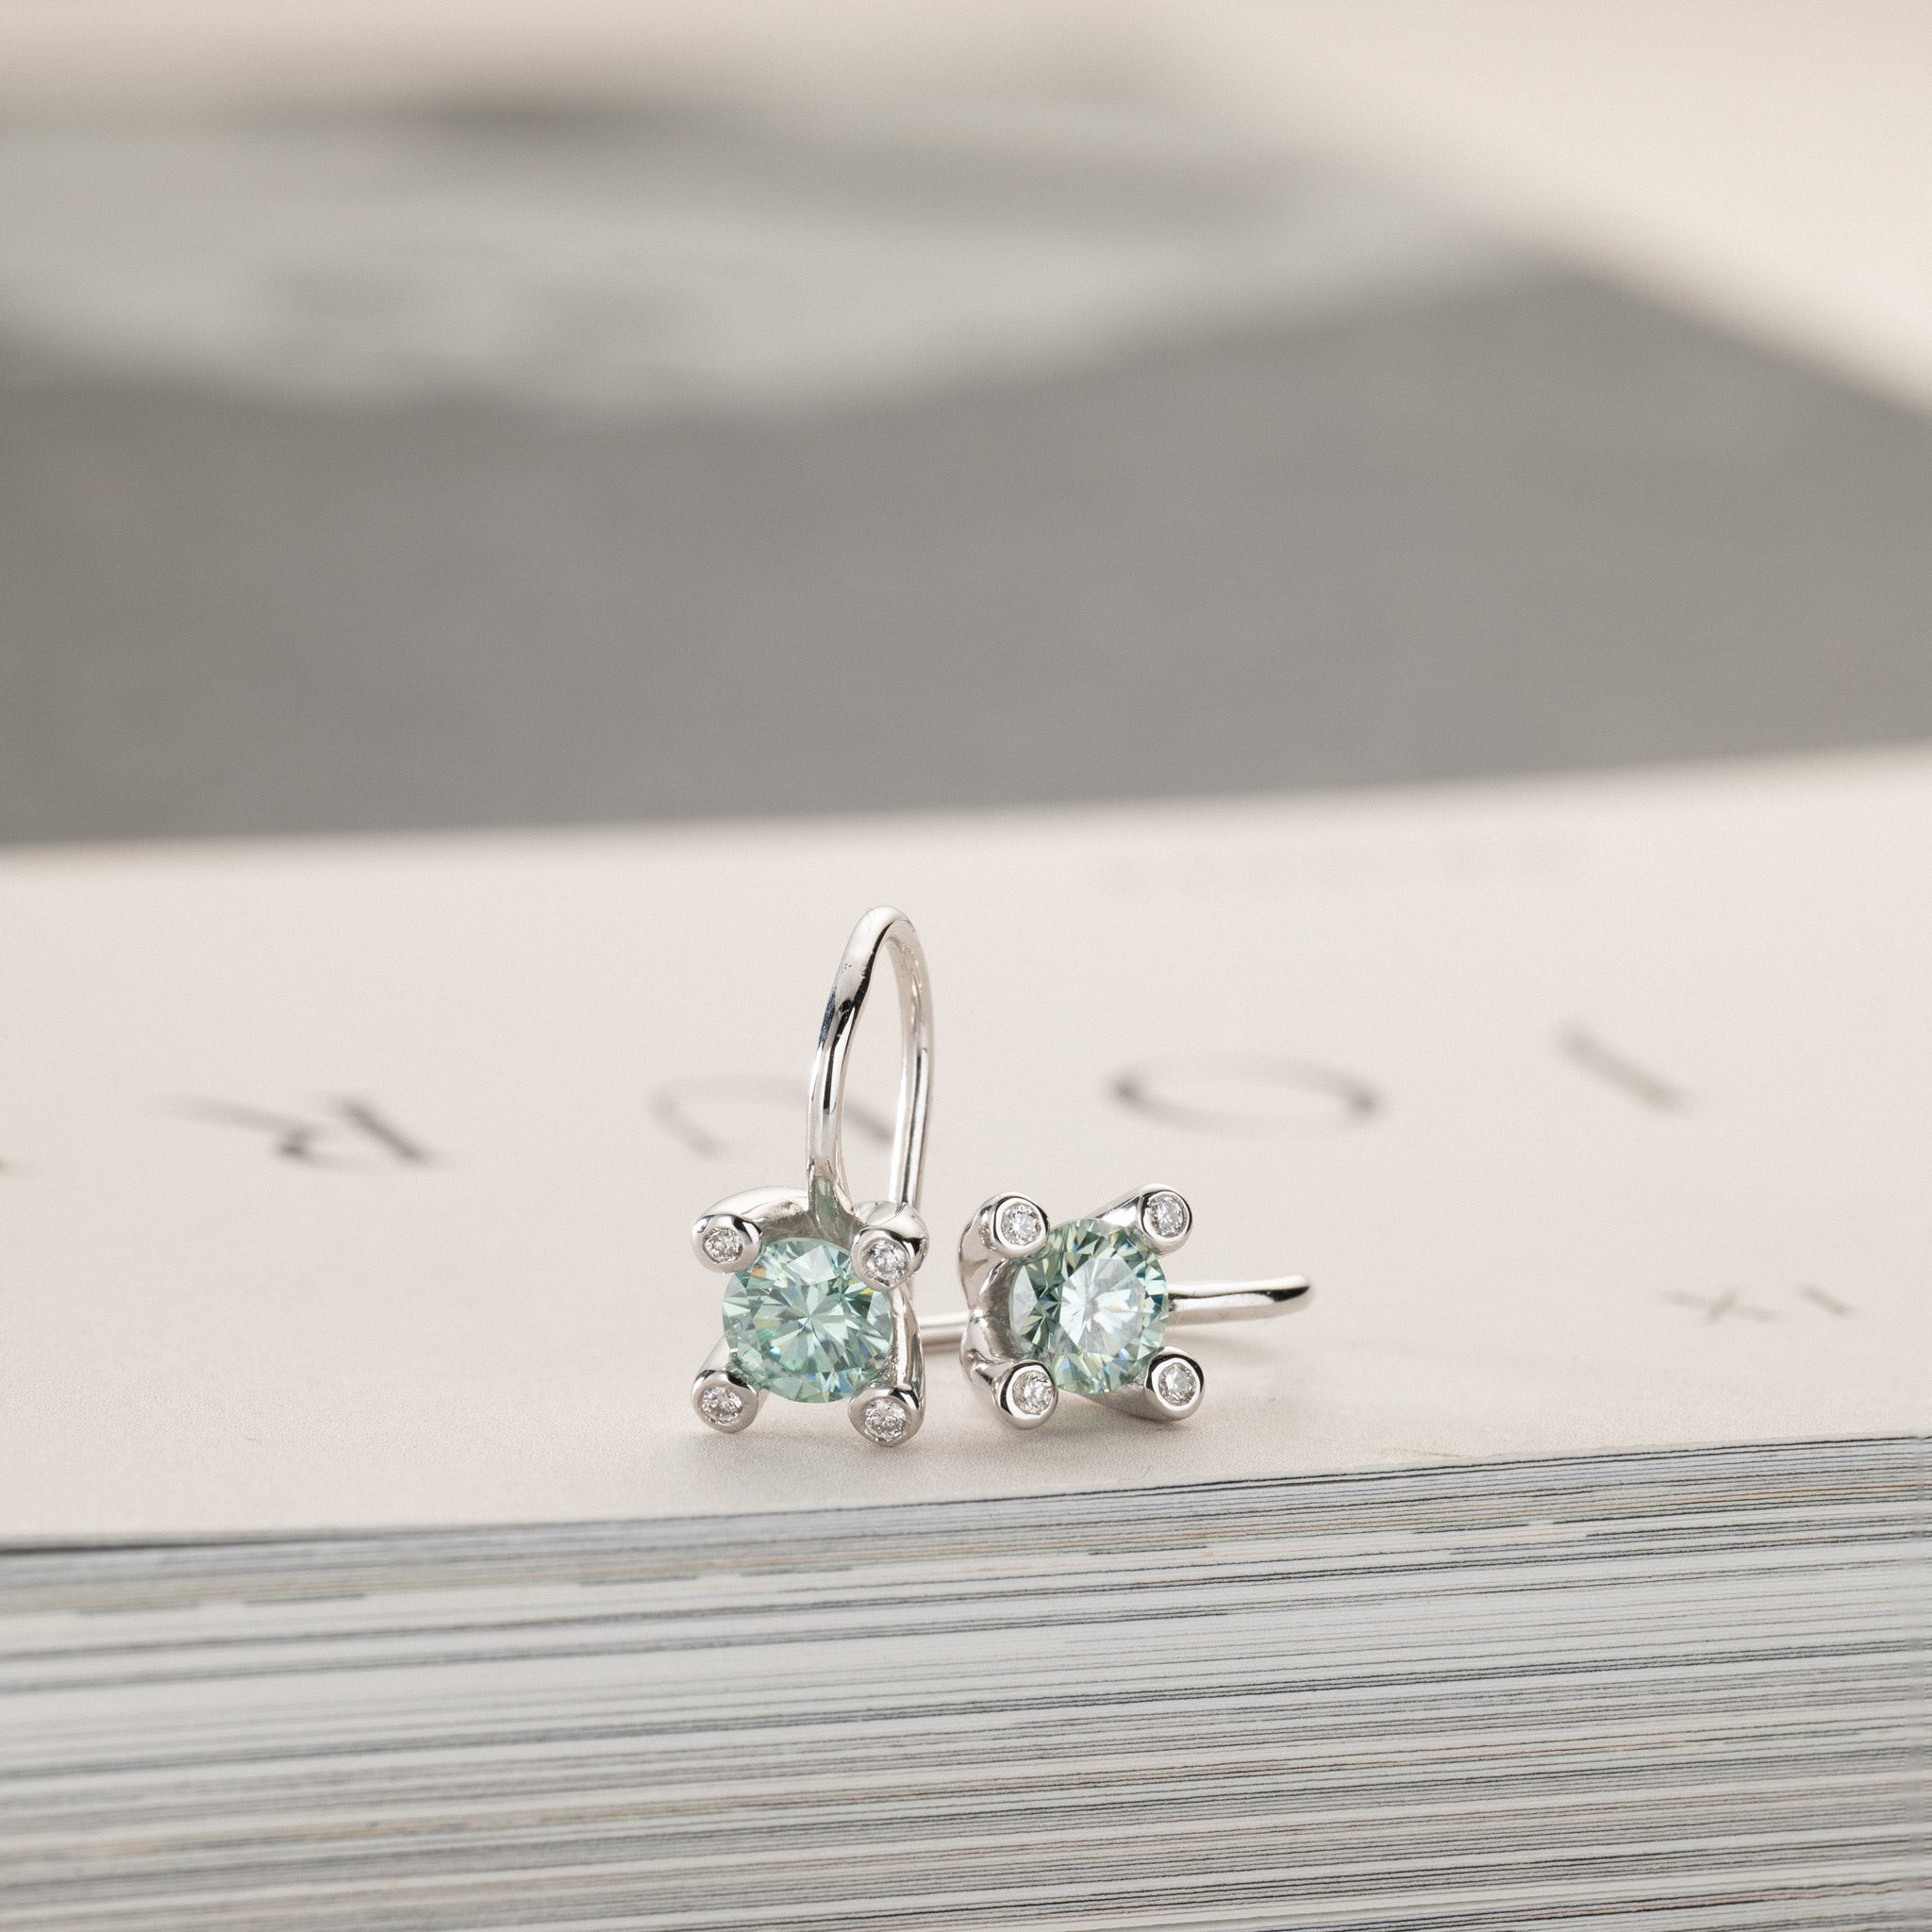 2x0.50ct light green moissanite solitaire earrings silver diamonds in crown Miriam